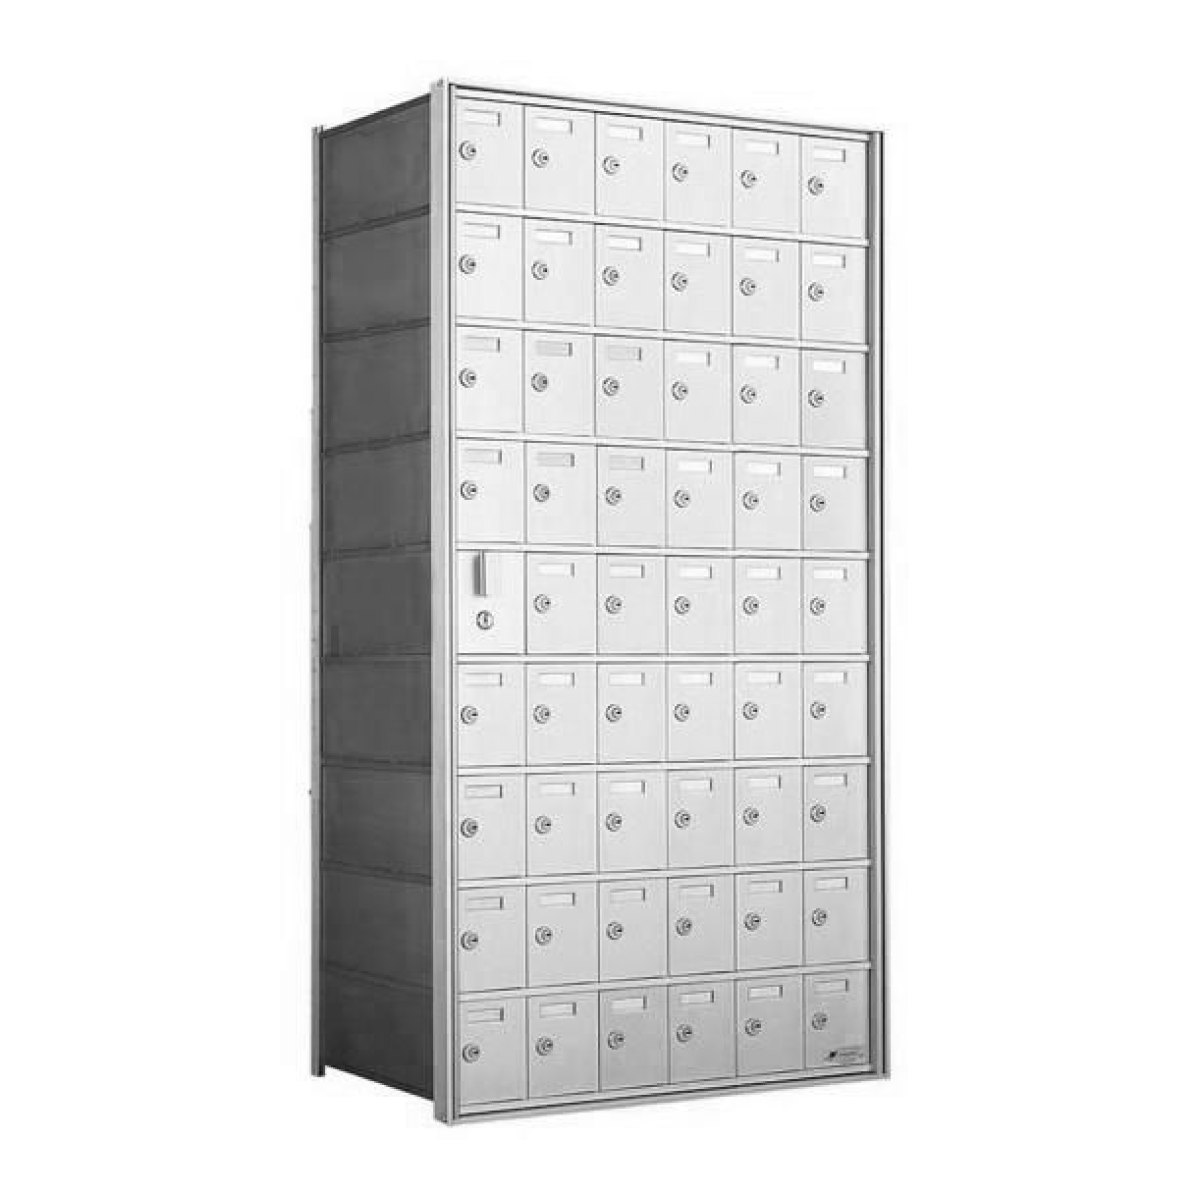 9 Doors High x 6 Doors (53 Tenants) 1600 Front-Load Private Distribution Mailboxin Anodized Aluminum Finish Product Image